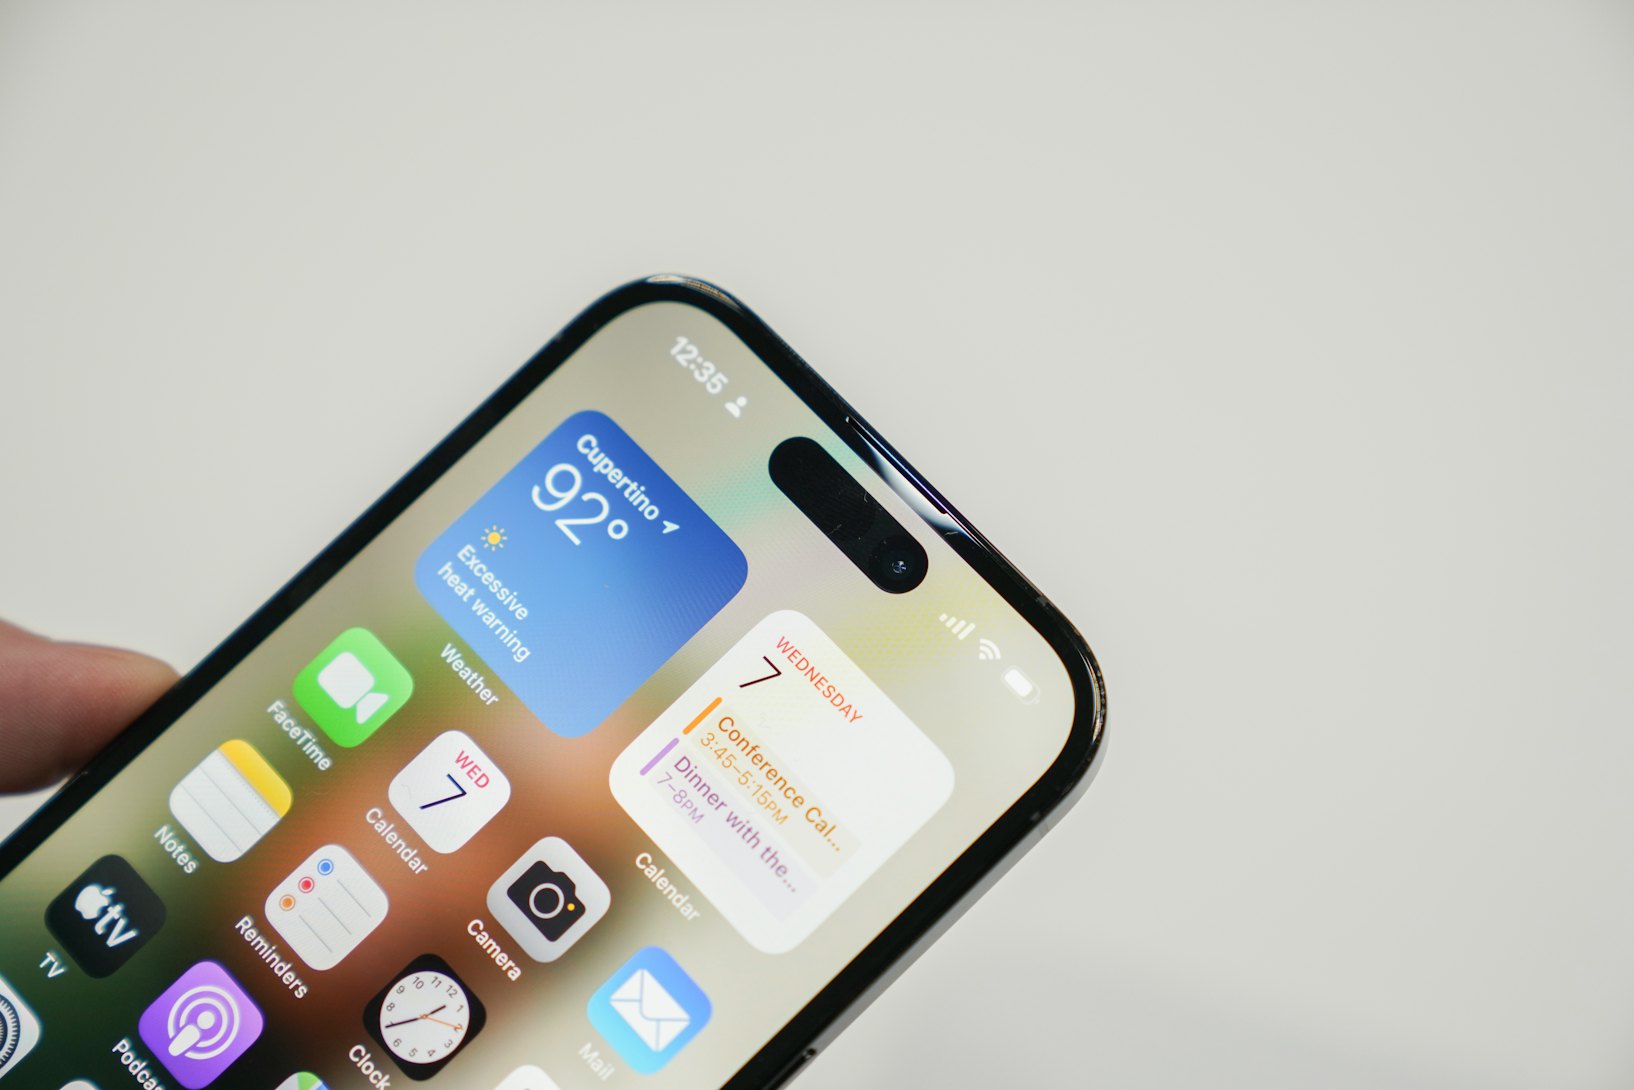 iPhone 14 Pro close-up, showing the "Dynamic Island" that replaces the notch